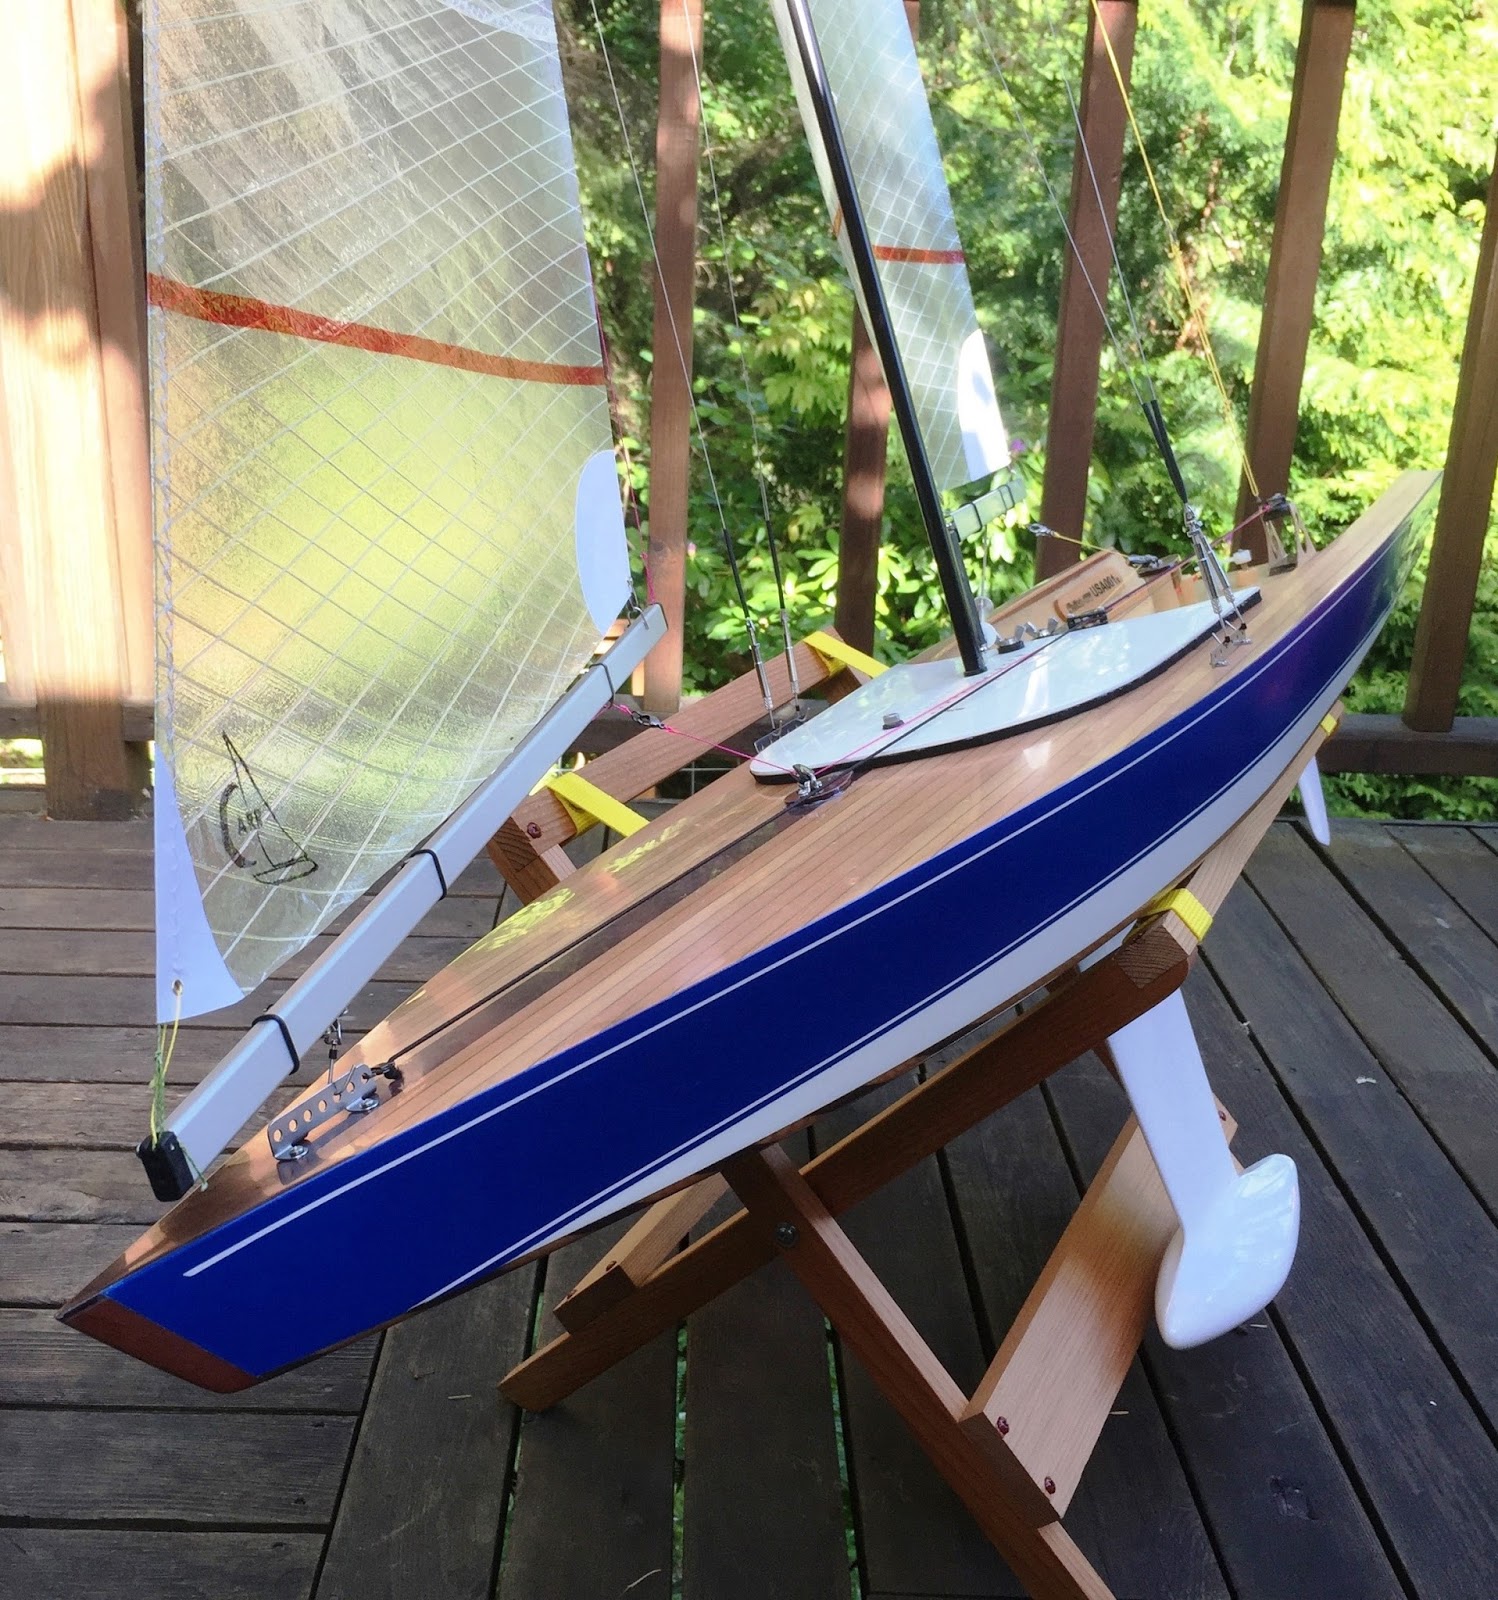 rc bait boat for sale south africa, star 45 rc sailboat